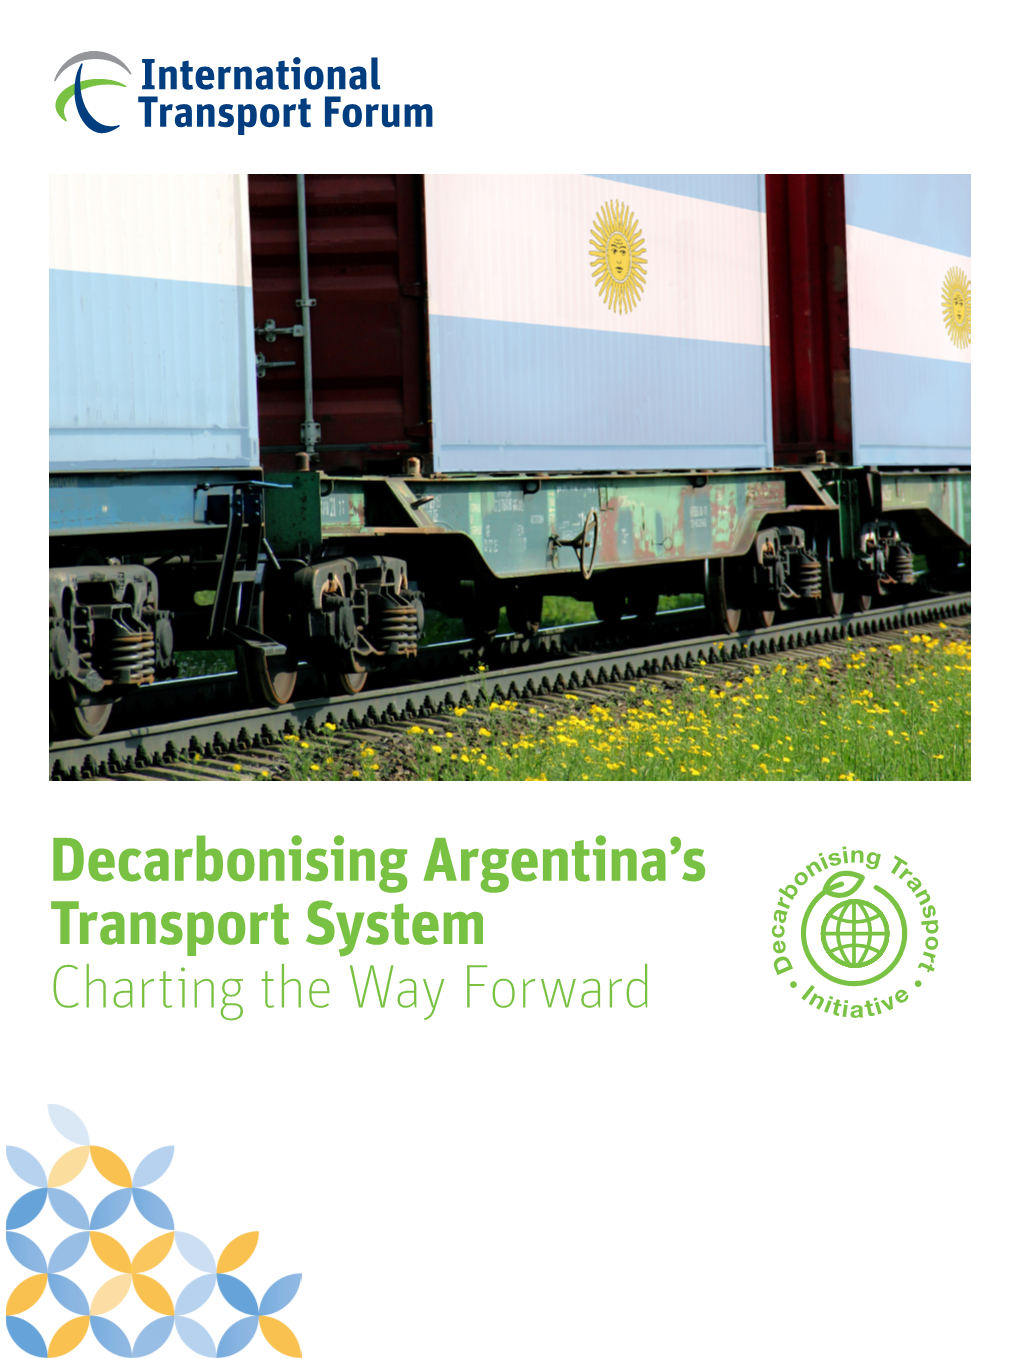 Decarbonising Argentina's Transport System Charting the Way Forward